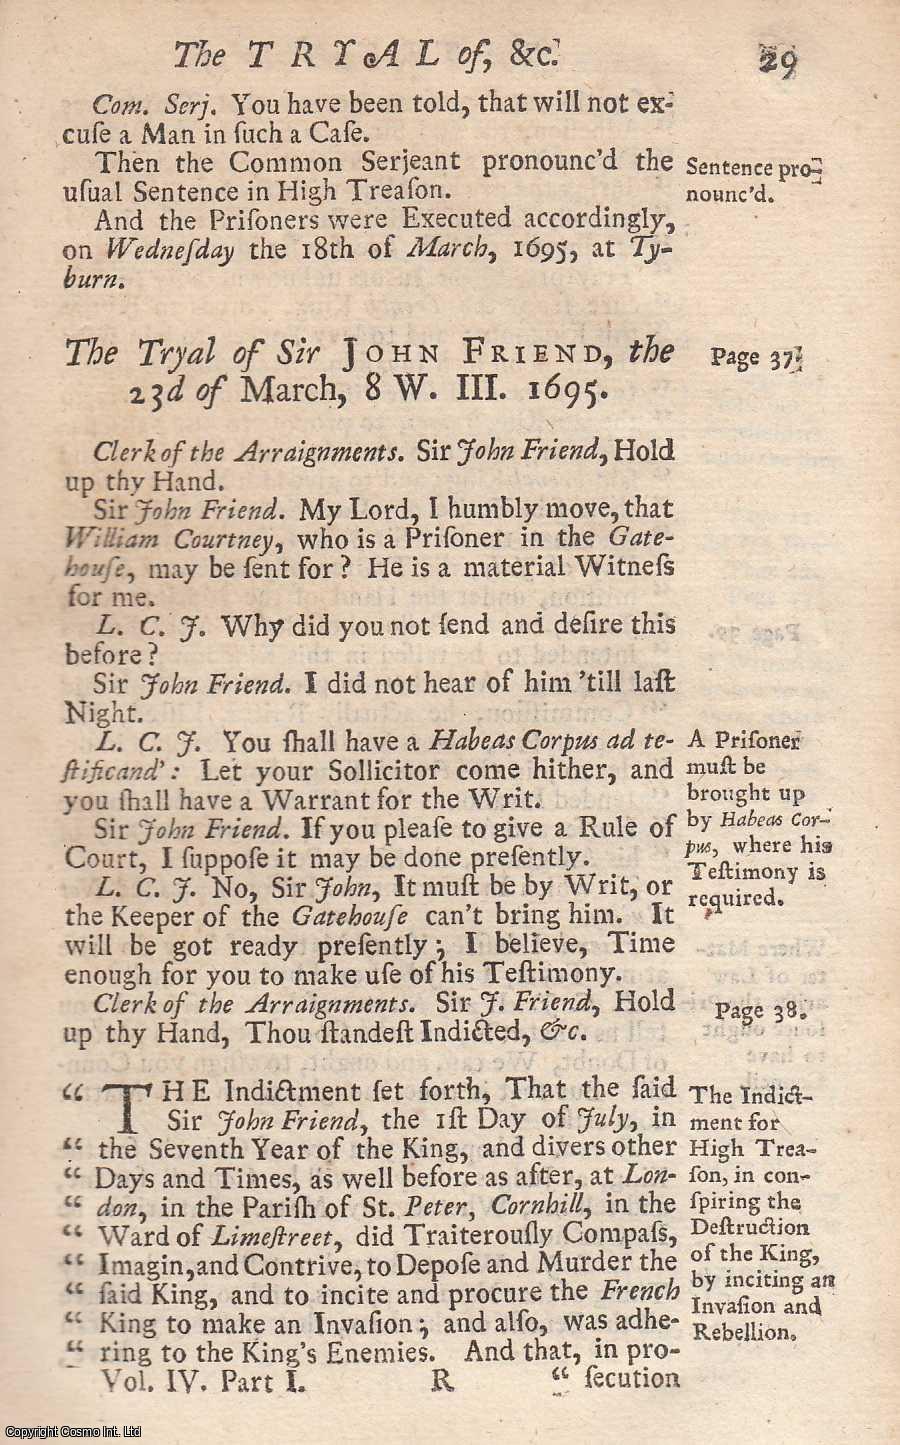 [Trial] - The Trial of Sir John Freind, Knight, at the Old Bailey, for High Treason, March 23, 1695. An original report from the collected Tryals for High Treason, and Other Crimes, 1720.